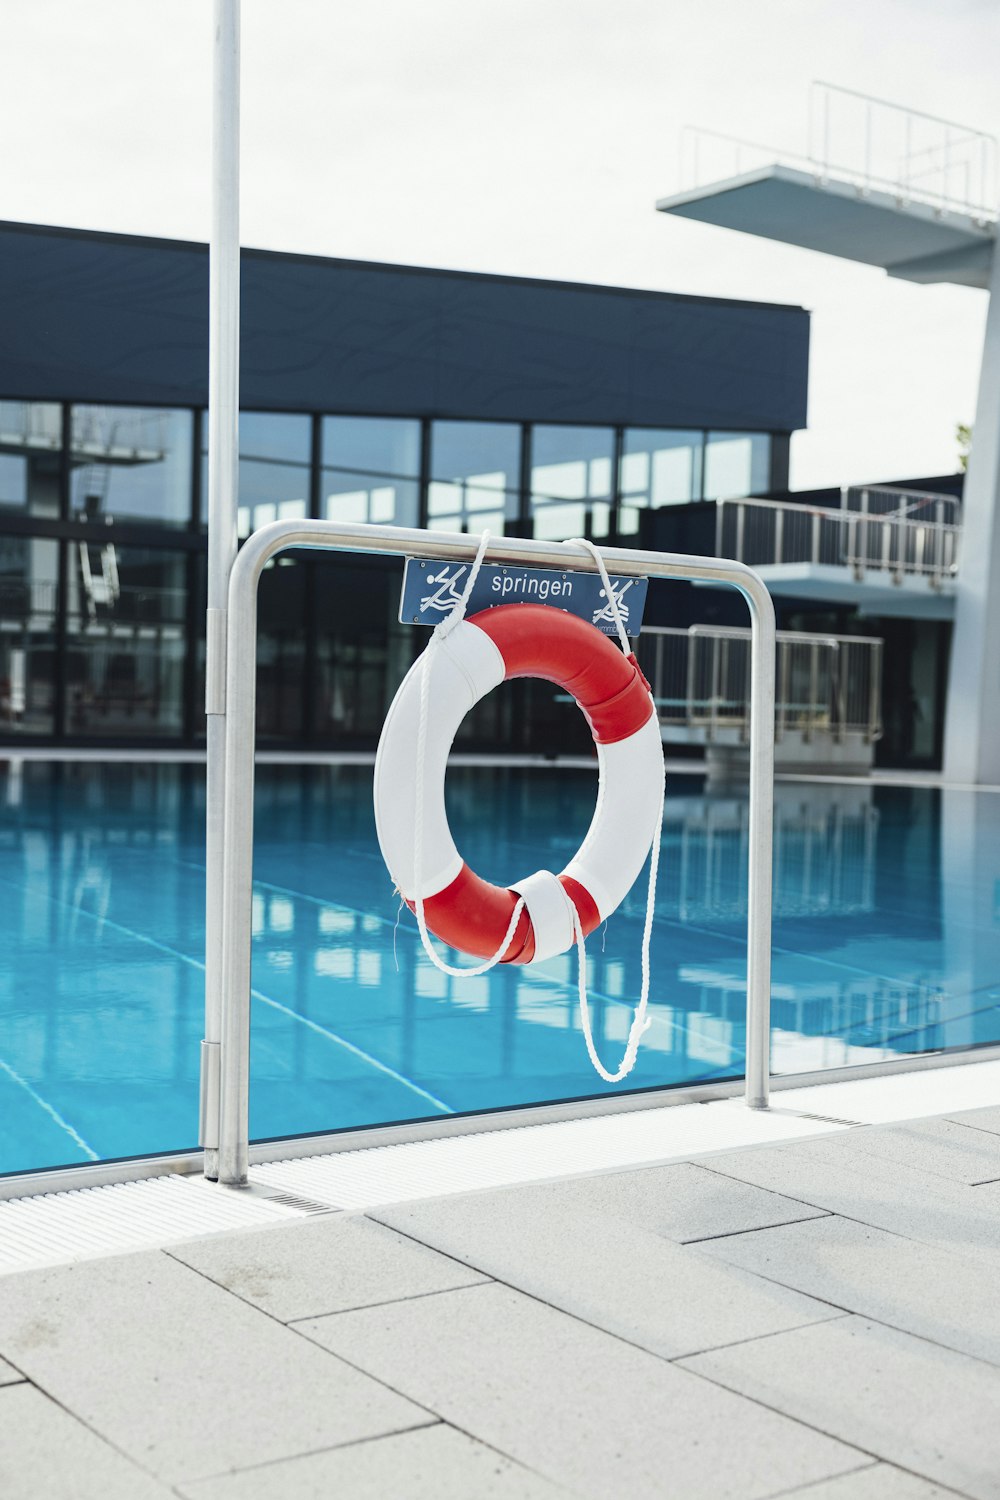 a life preserver on the side of a swimming pool